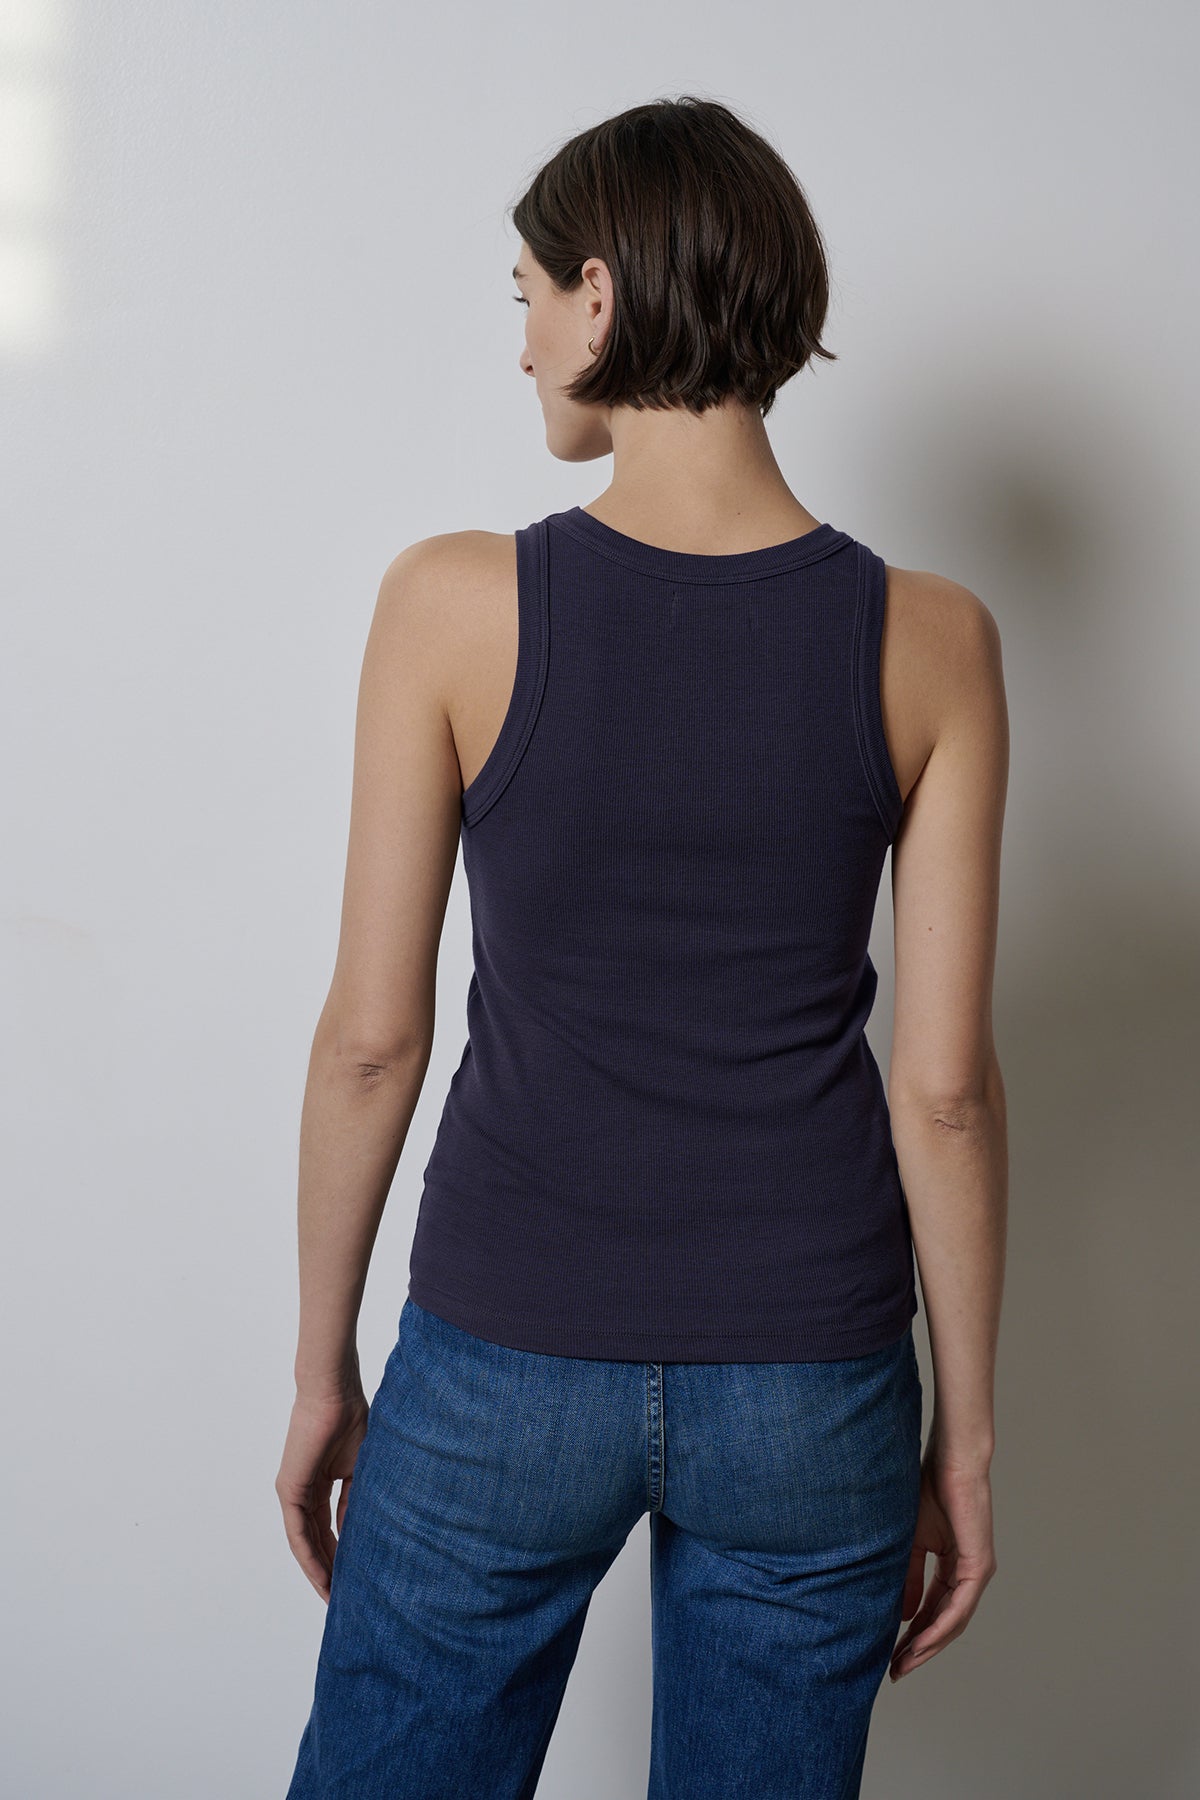 The woman's back view showcases a form-fitting CRUZ tank top by Velvet by Jenny Graham paired with jeans that offer stretch for comfort.-35547435008193